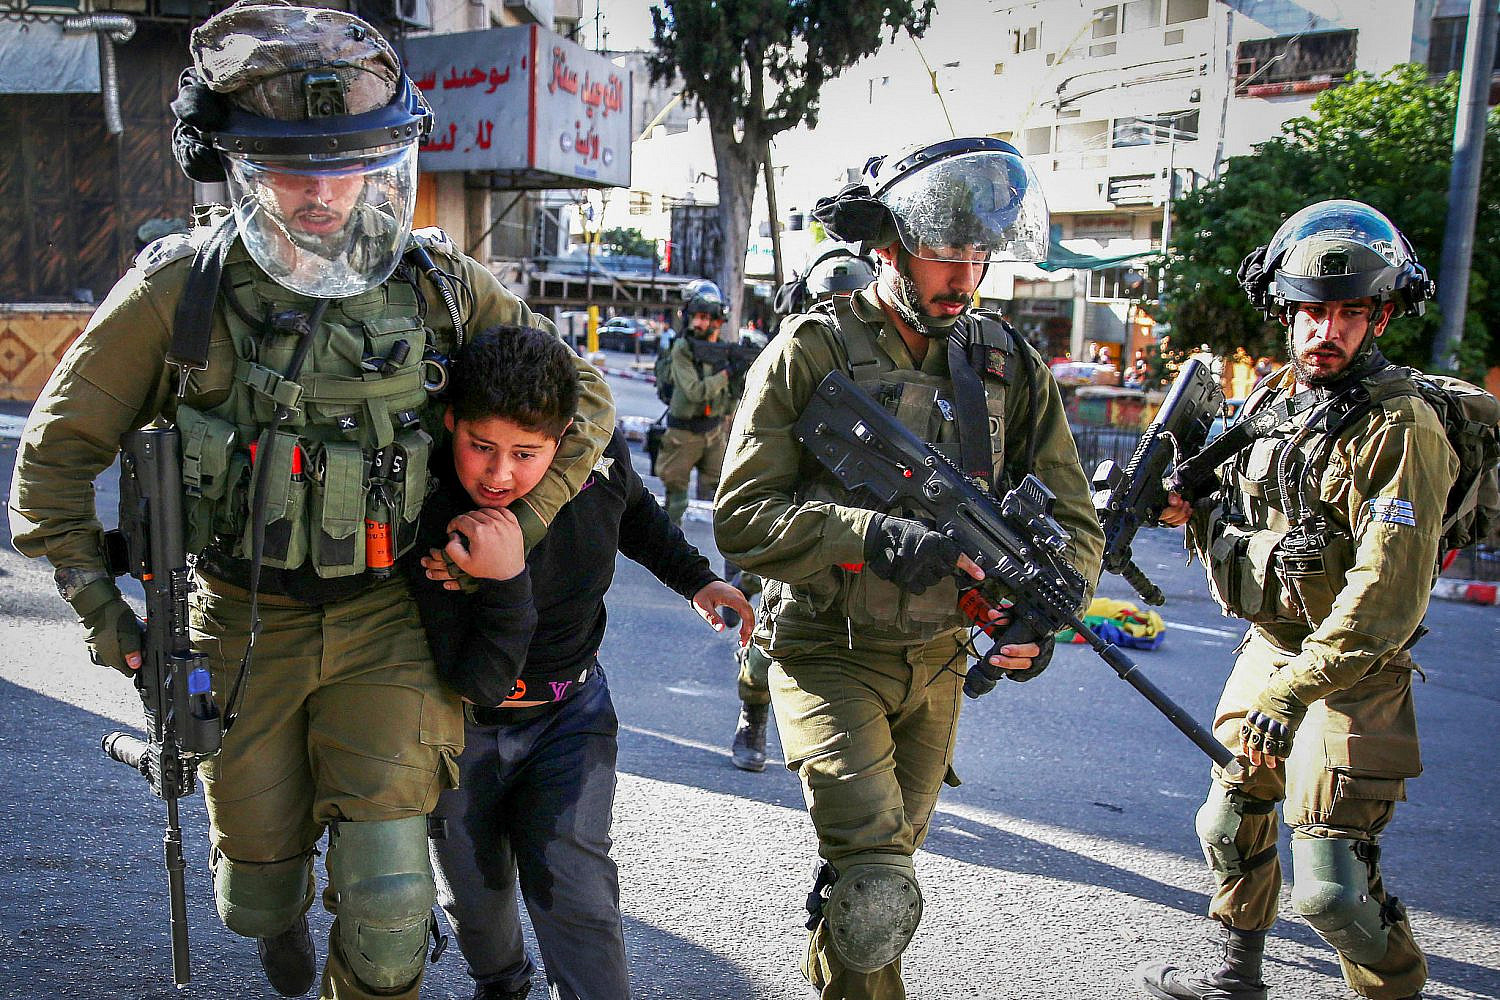 Israeli soldiers arrest a Palestinian boy as Jew-Israelis tour in the West Bank city of Hebron, during the Jewish holiday of Sukkot, September 23, 2021. (Wisam Hashlamoun/Flash90)